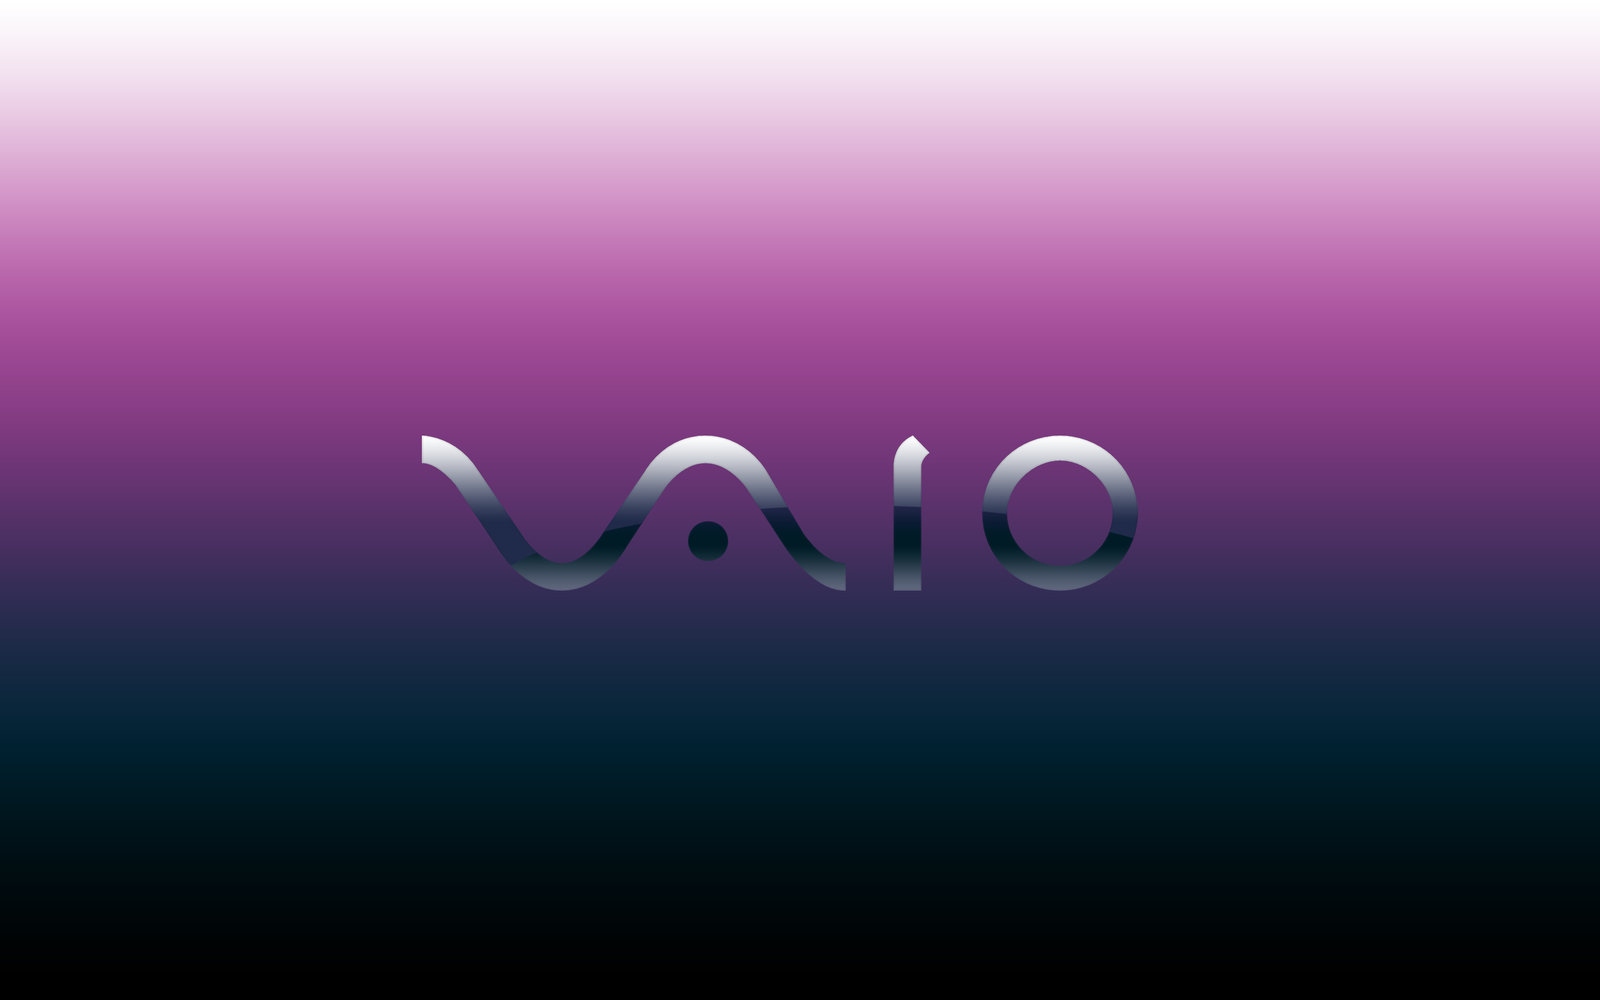 Sony Vaio Wallpaper Image Amp Pictures Becuo